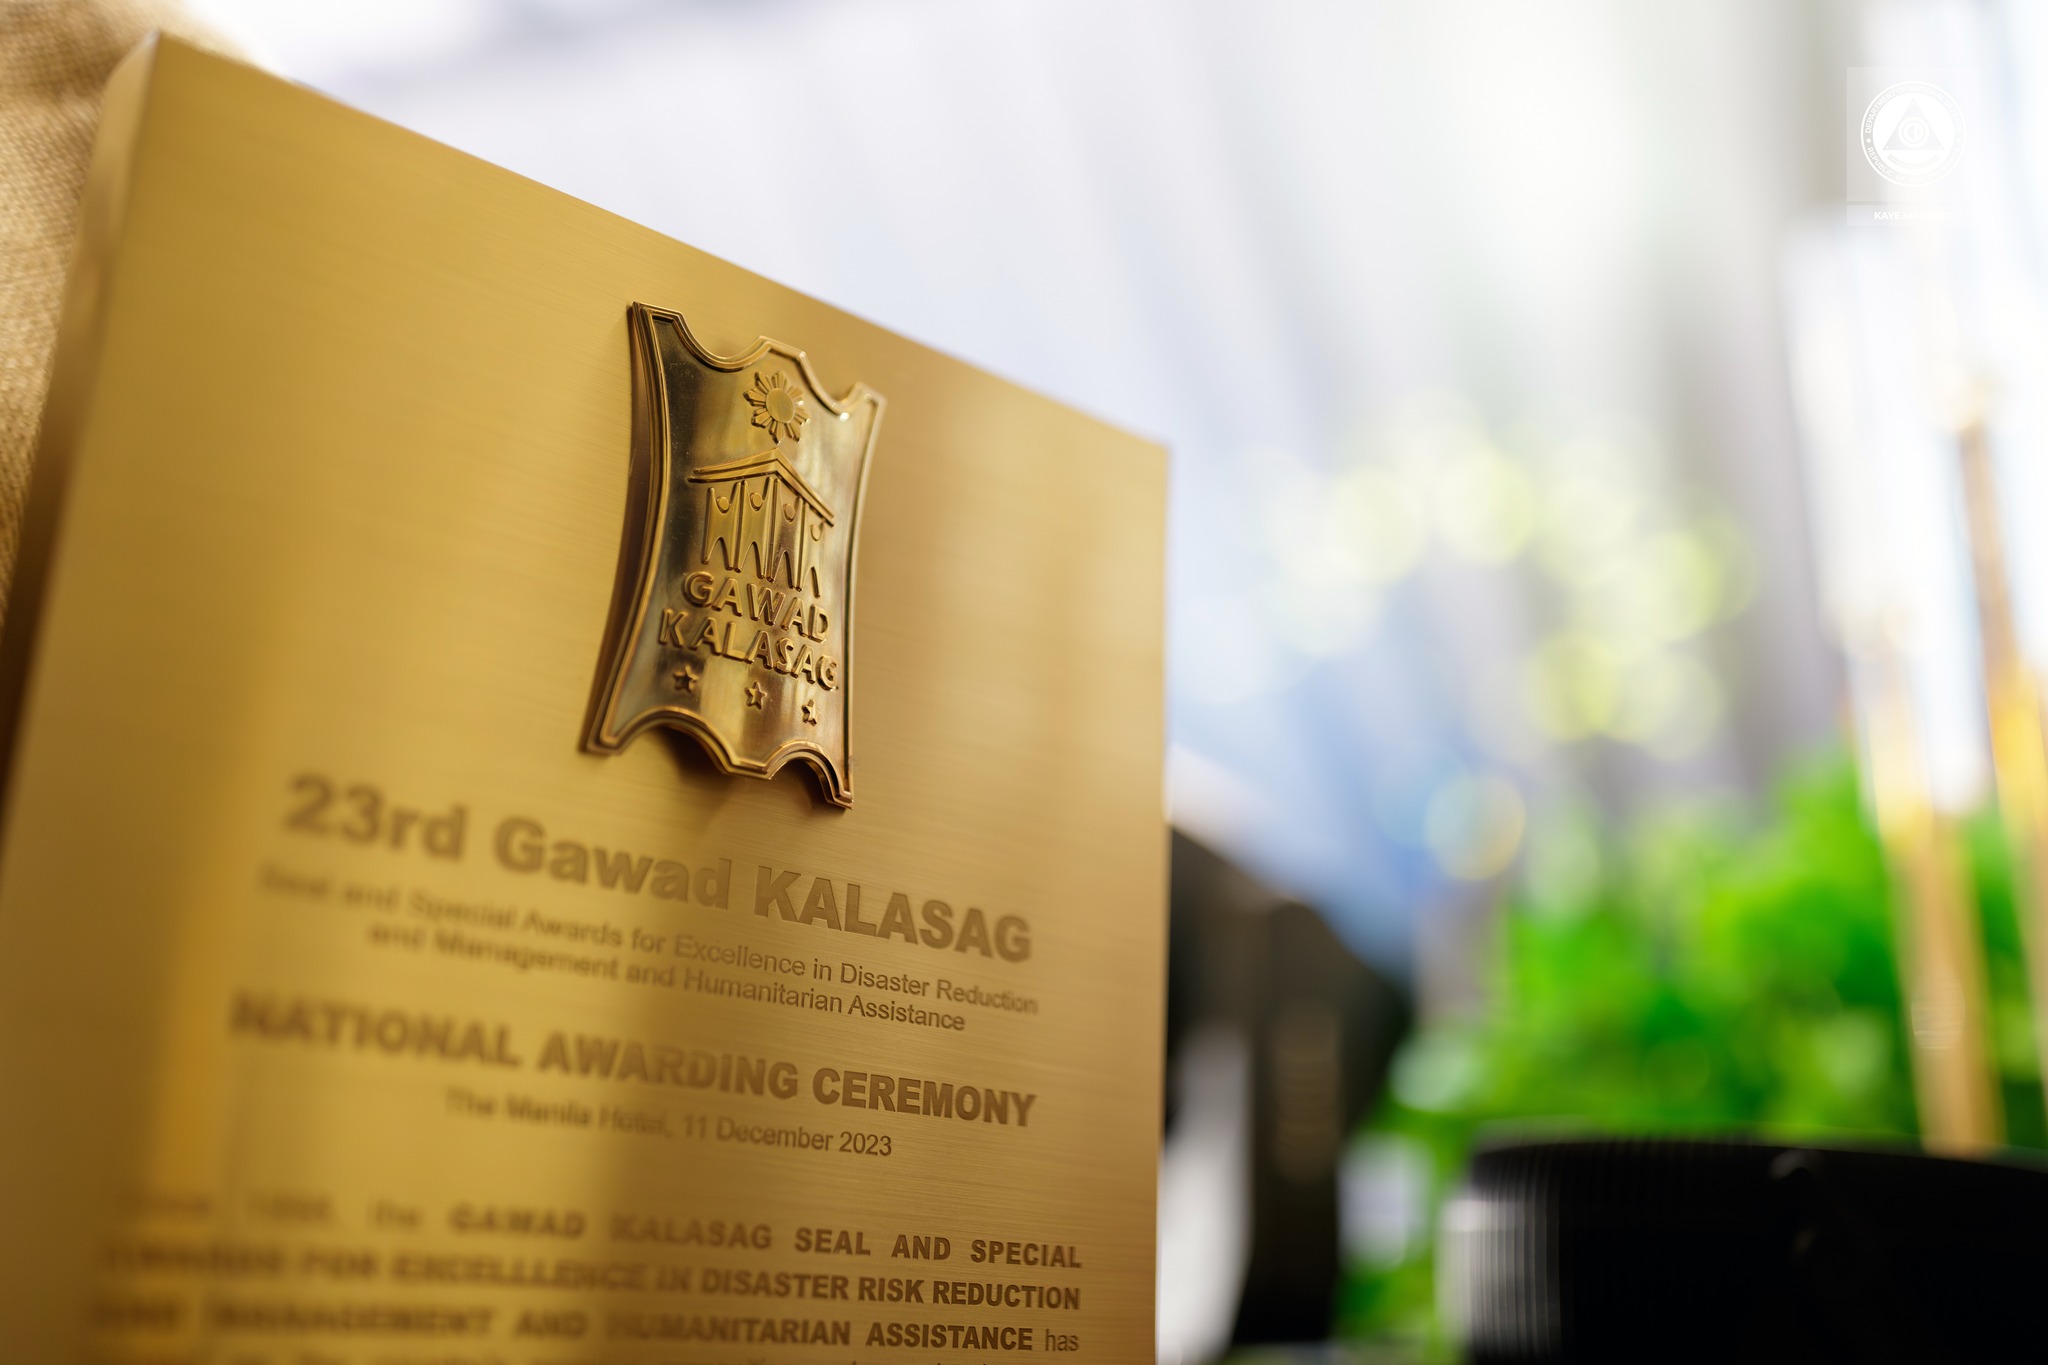 Province of Sorsogon recognized as one of the National Gawad KALASAG Awardee 2023